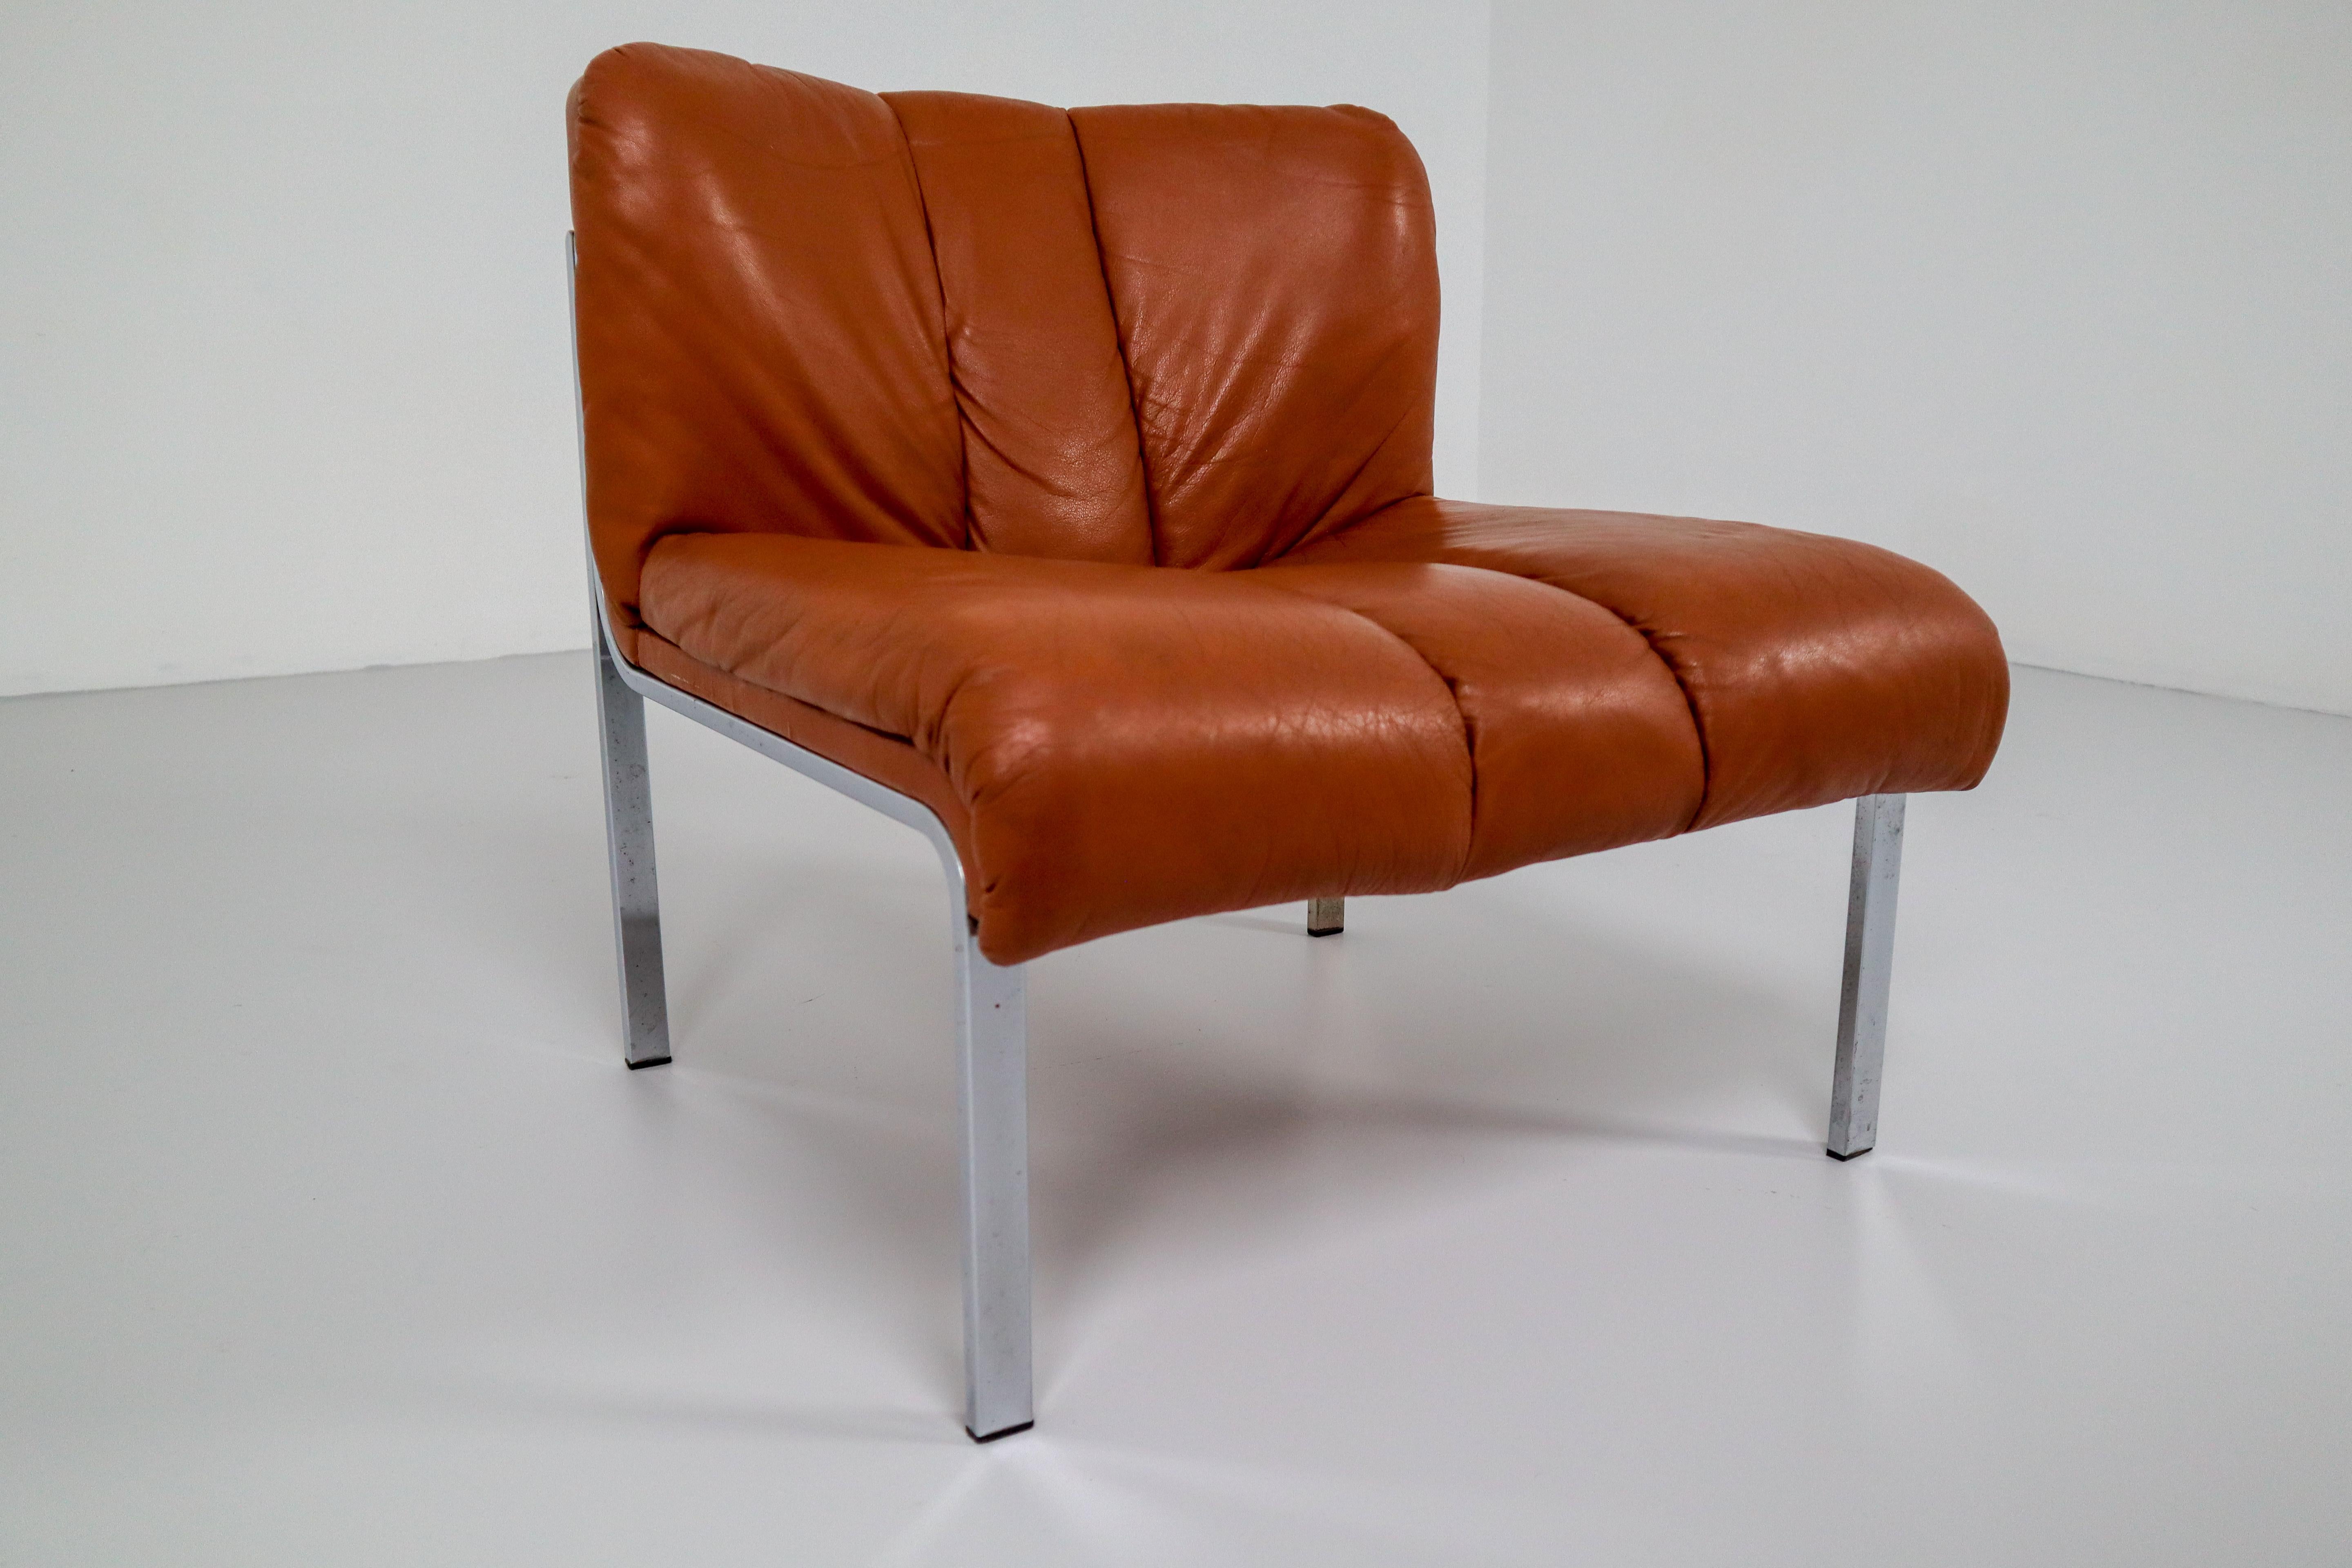 Swiss Set of Three Chairs, Sofa in Cognac Leather by Girsberger, Switzerland, 1970s